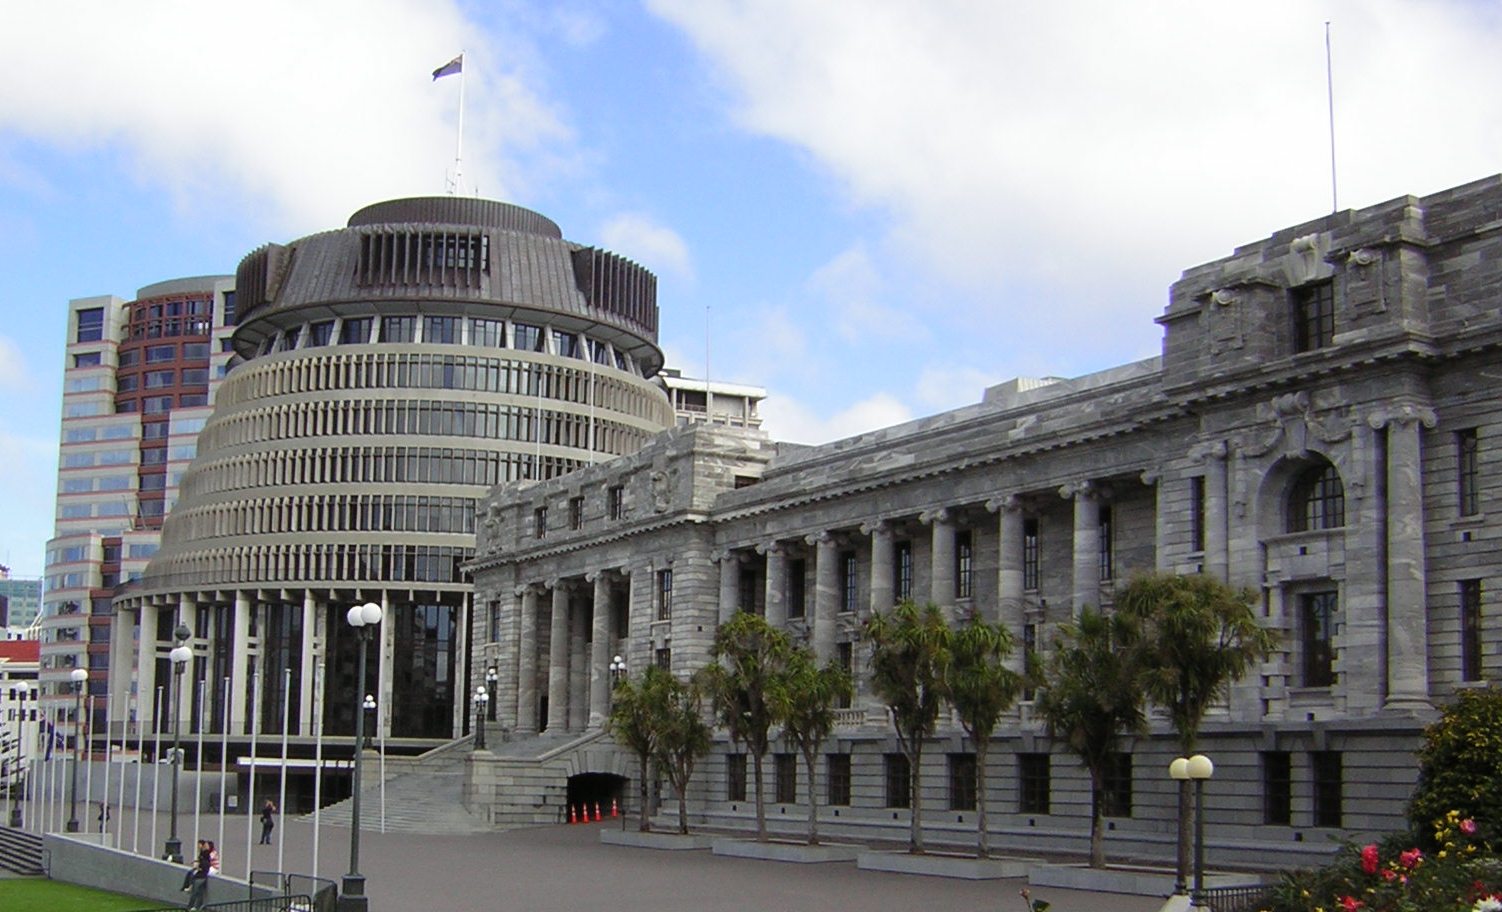 New Zealand Maori leader ejected from parliament for refusing to wear 'colonial noose'